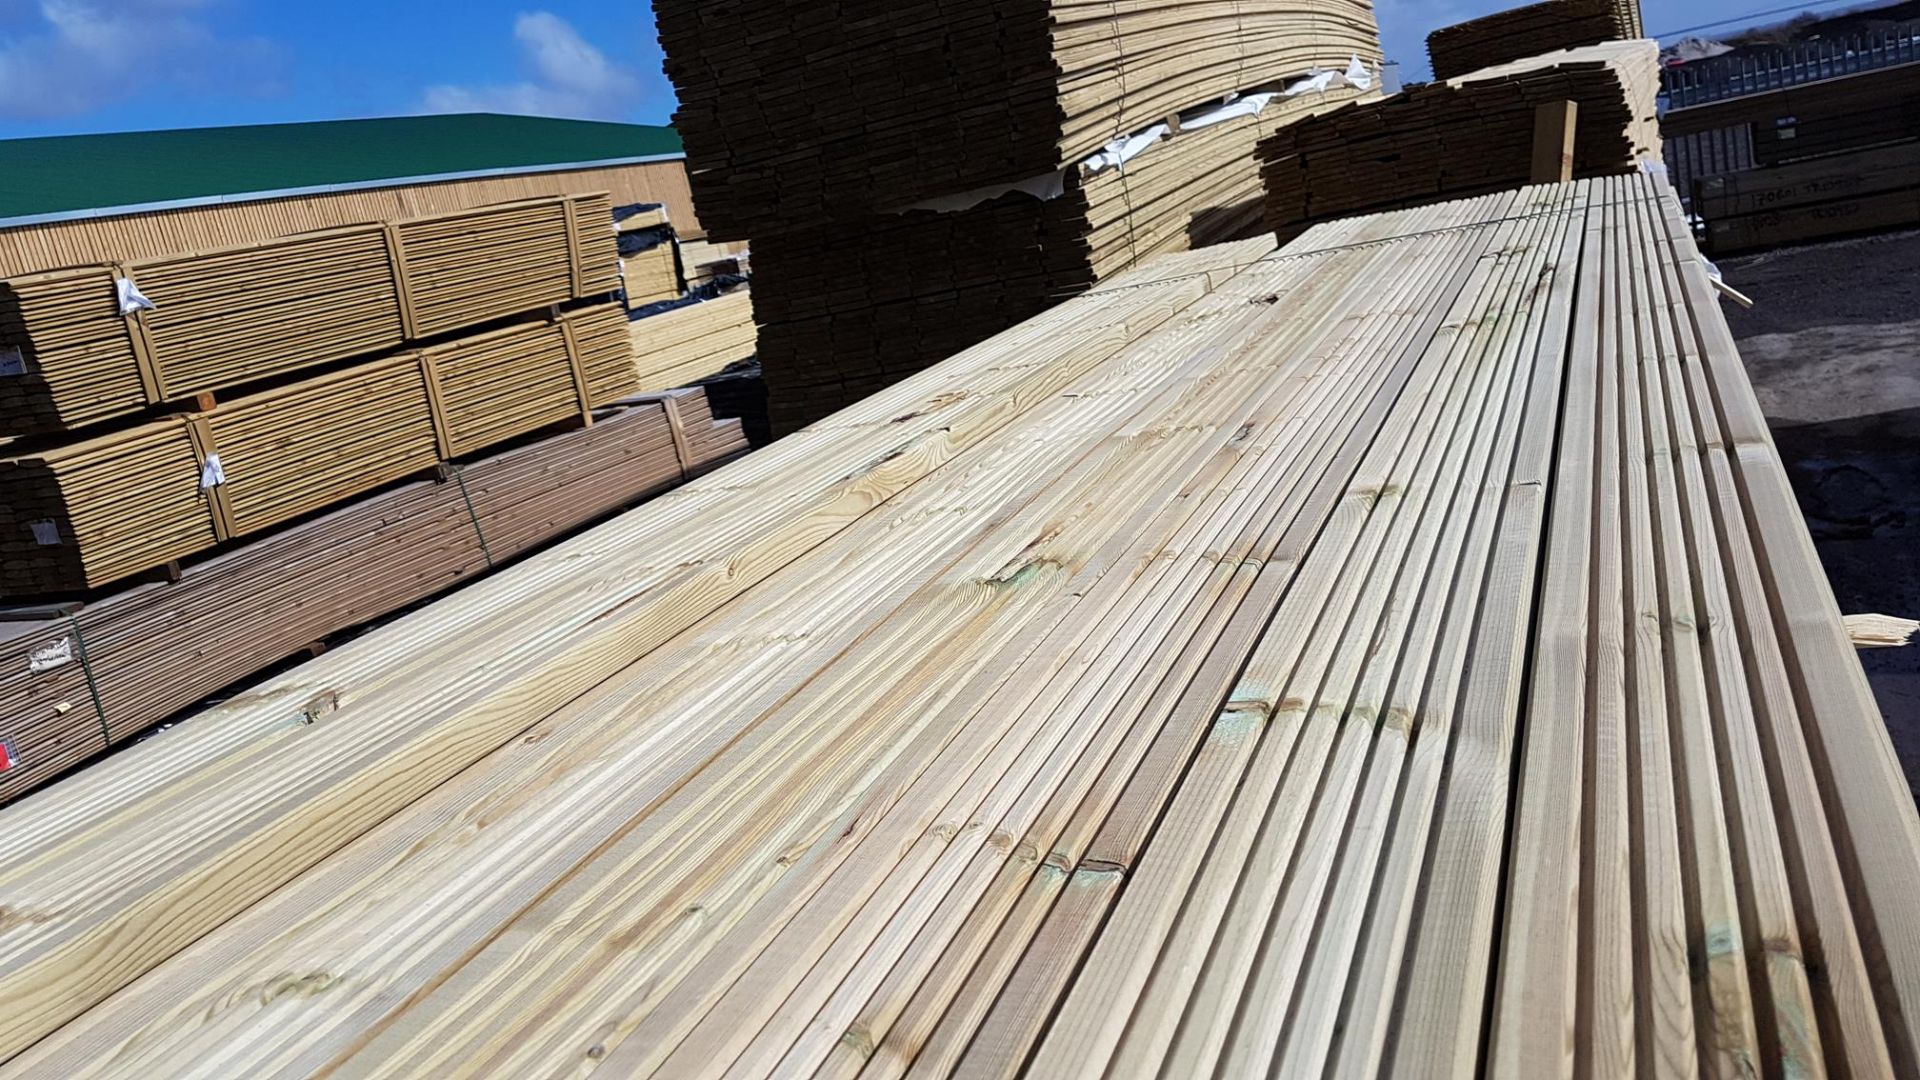 * 38x125 (34x121), decking, tanalith treated, 55 pieces @ 4200mm. R630B. Please note this lot is